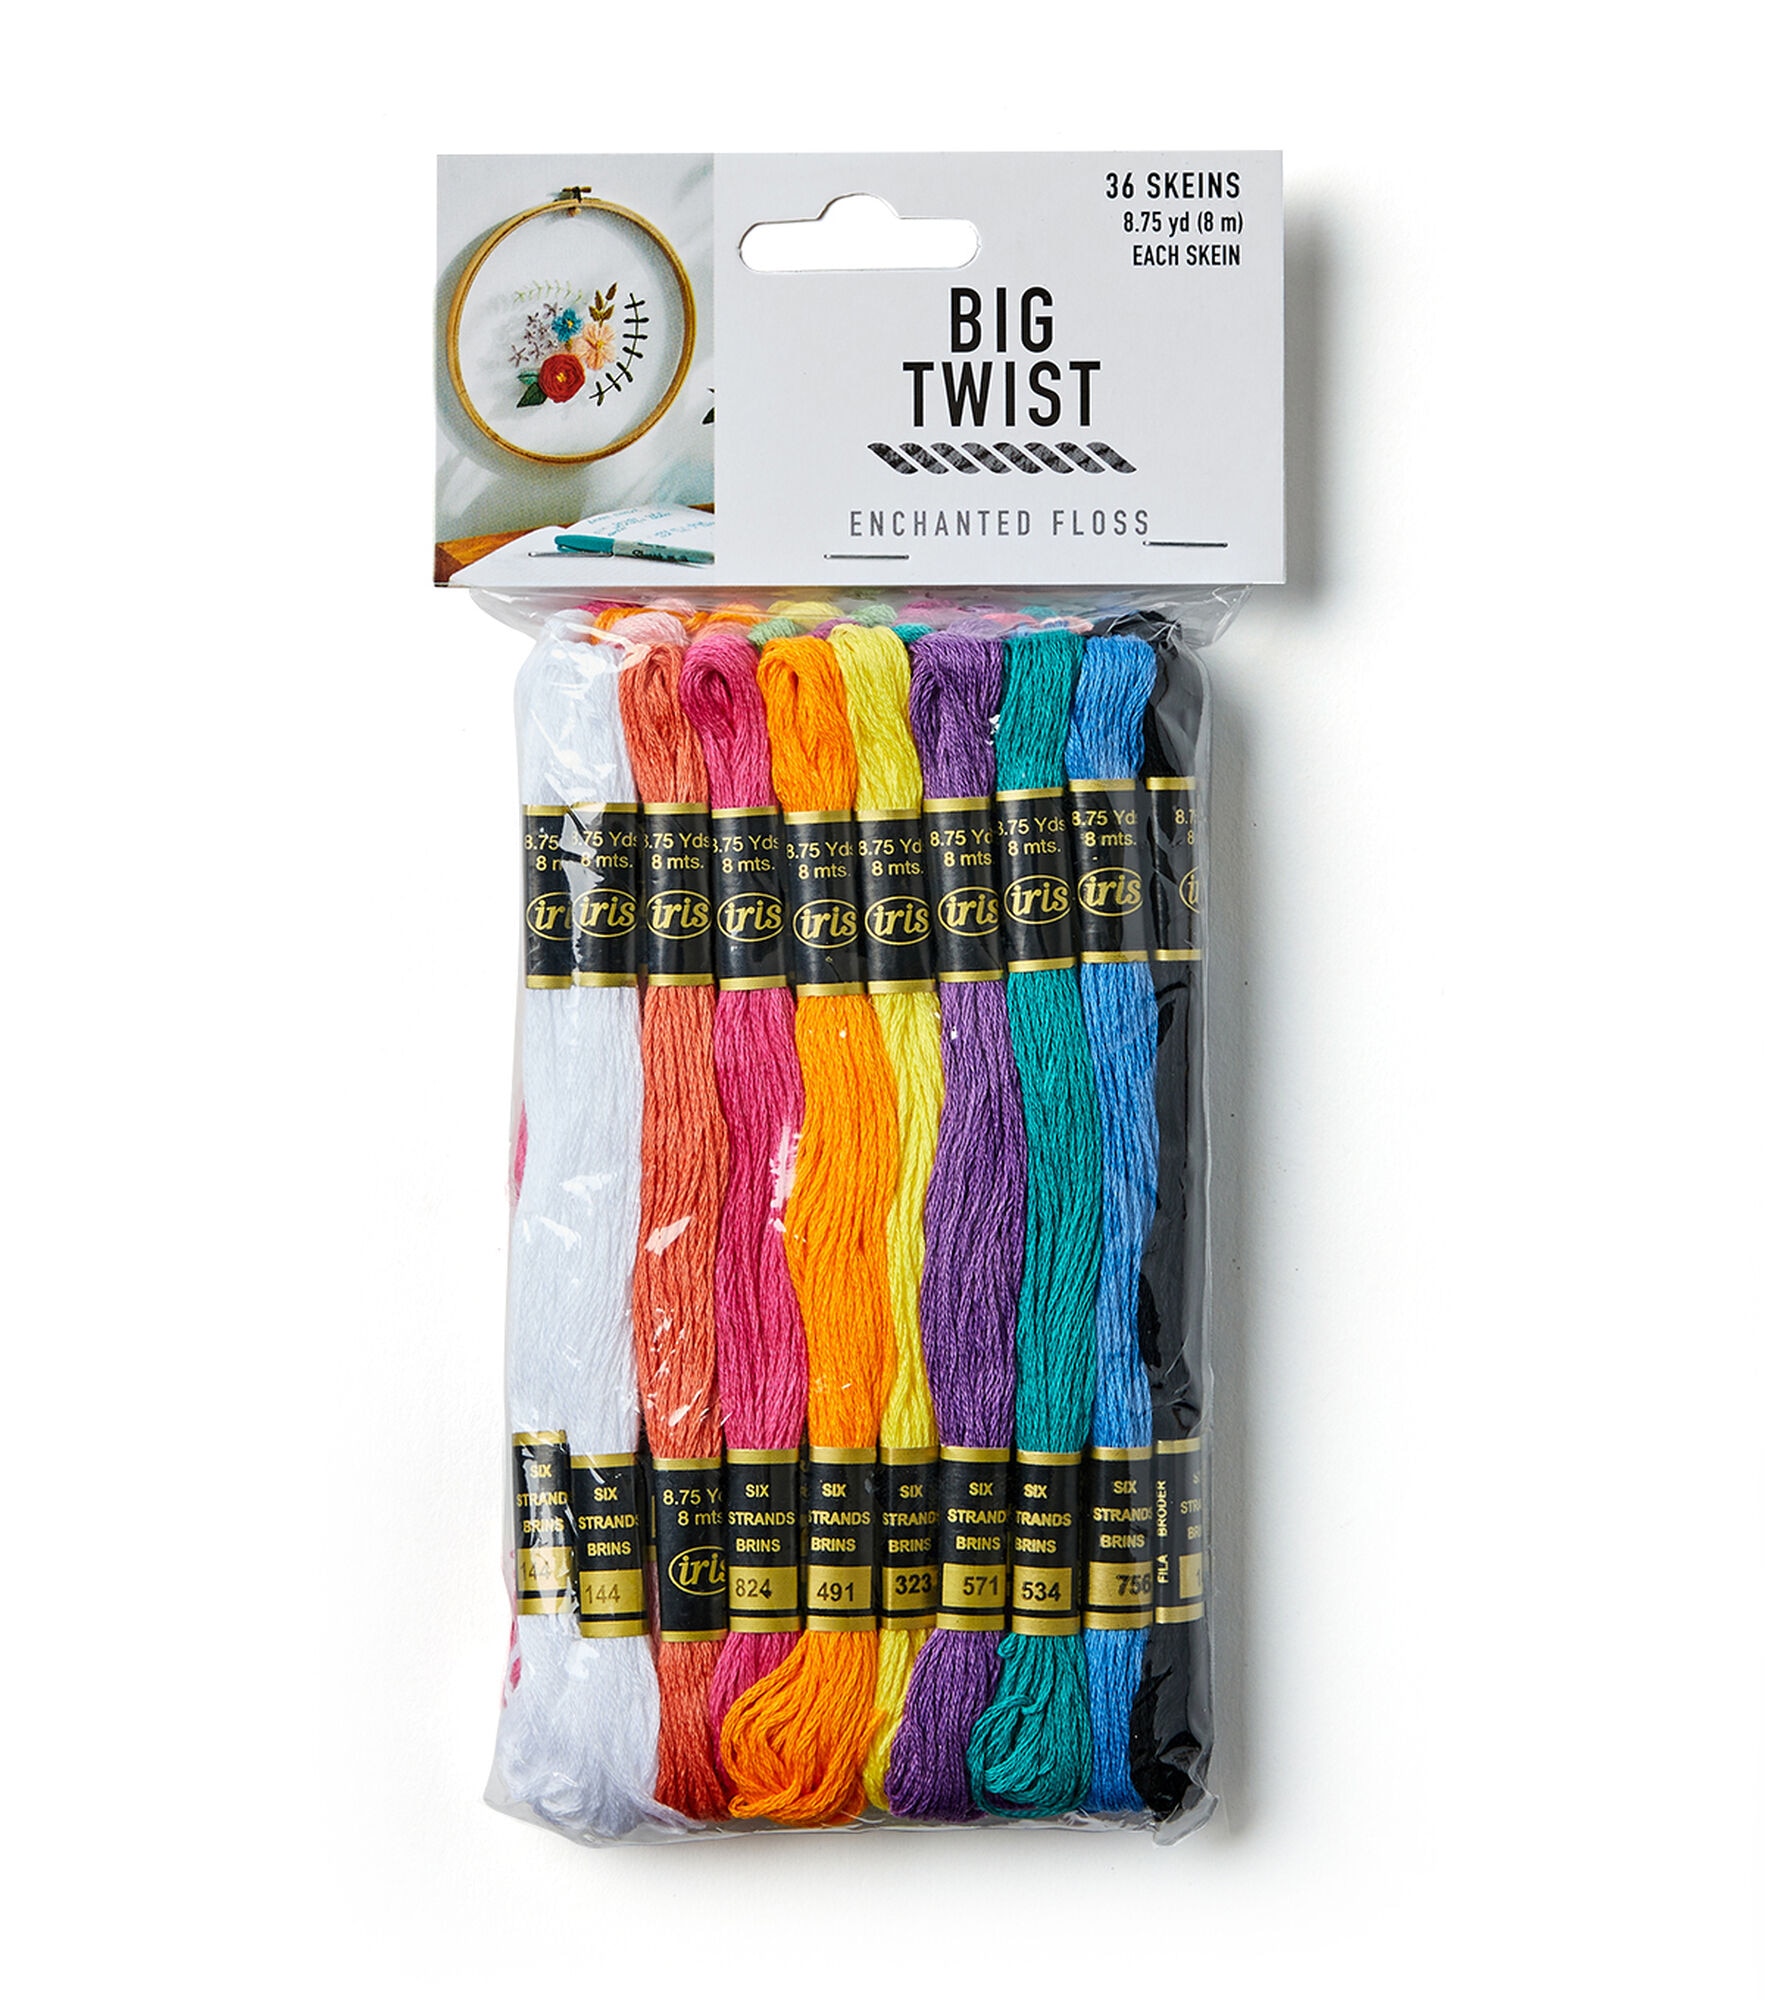 8.7yd Cotton Embroidery Floss 36ct by Big Twist, Enchanted, hi-res